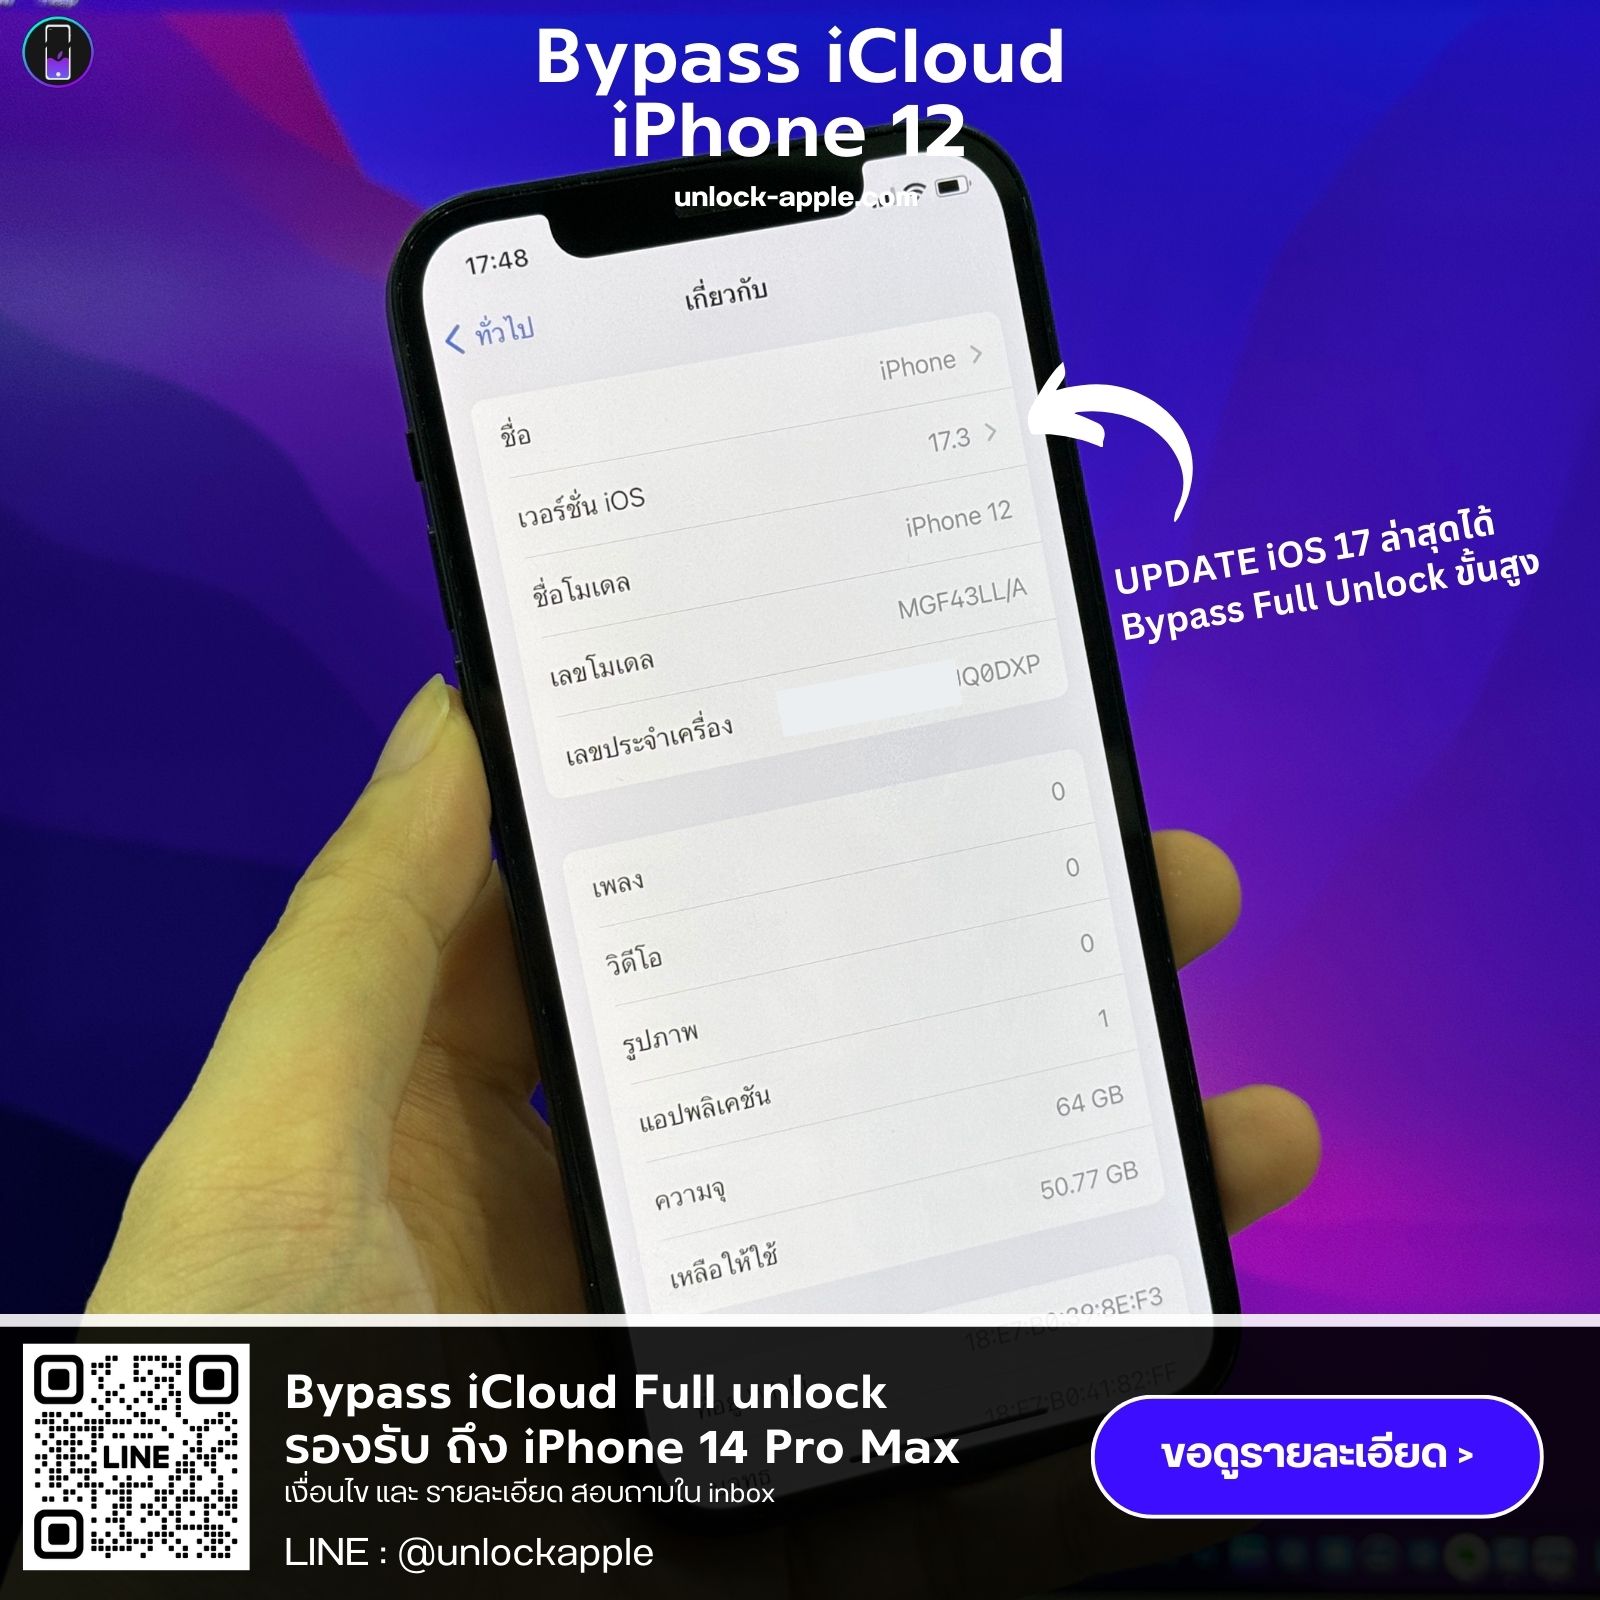 Bypass iCloud iPhone 12 -3